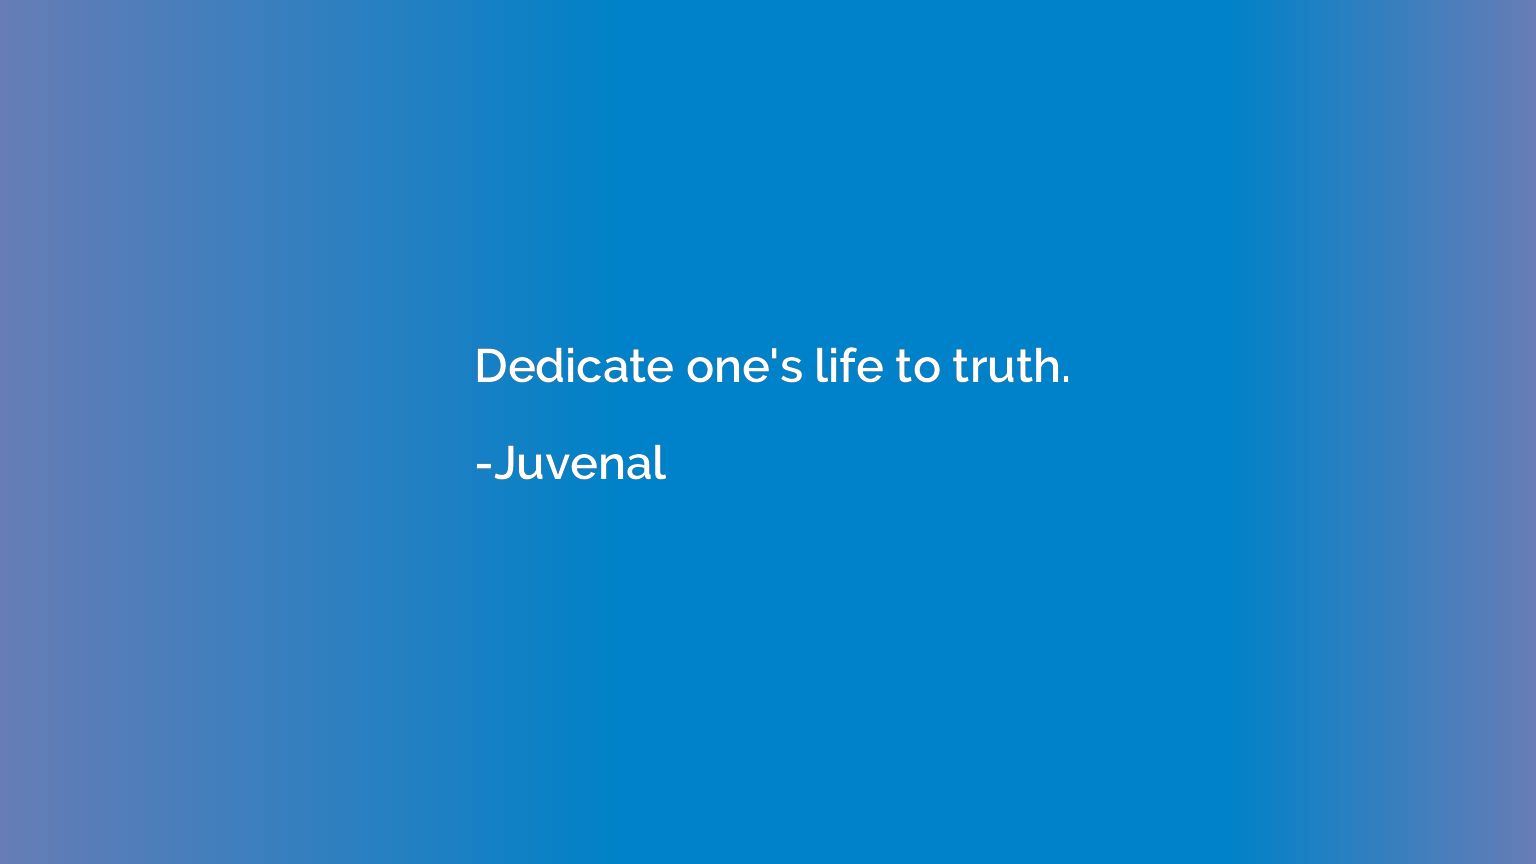 Dedicate one's life to truth.